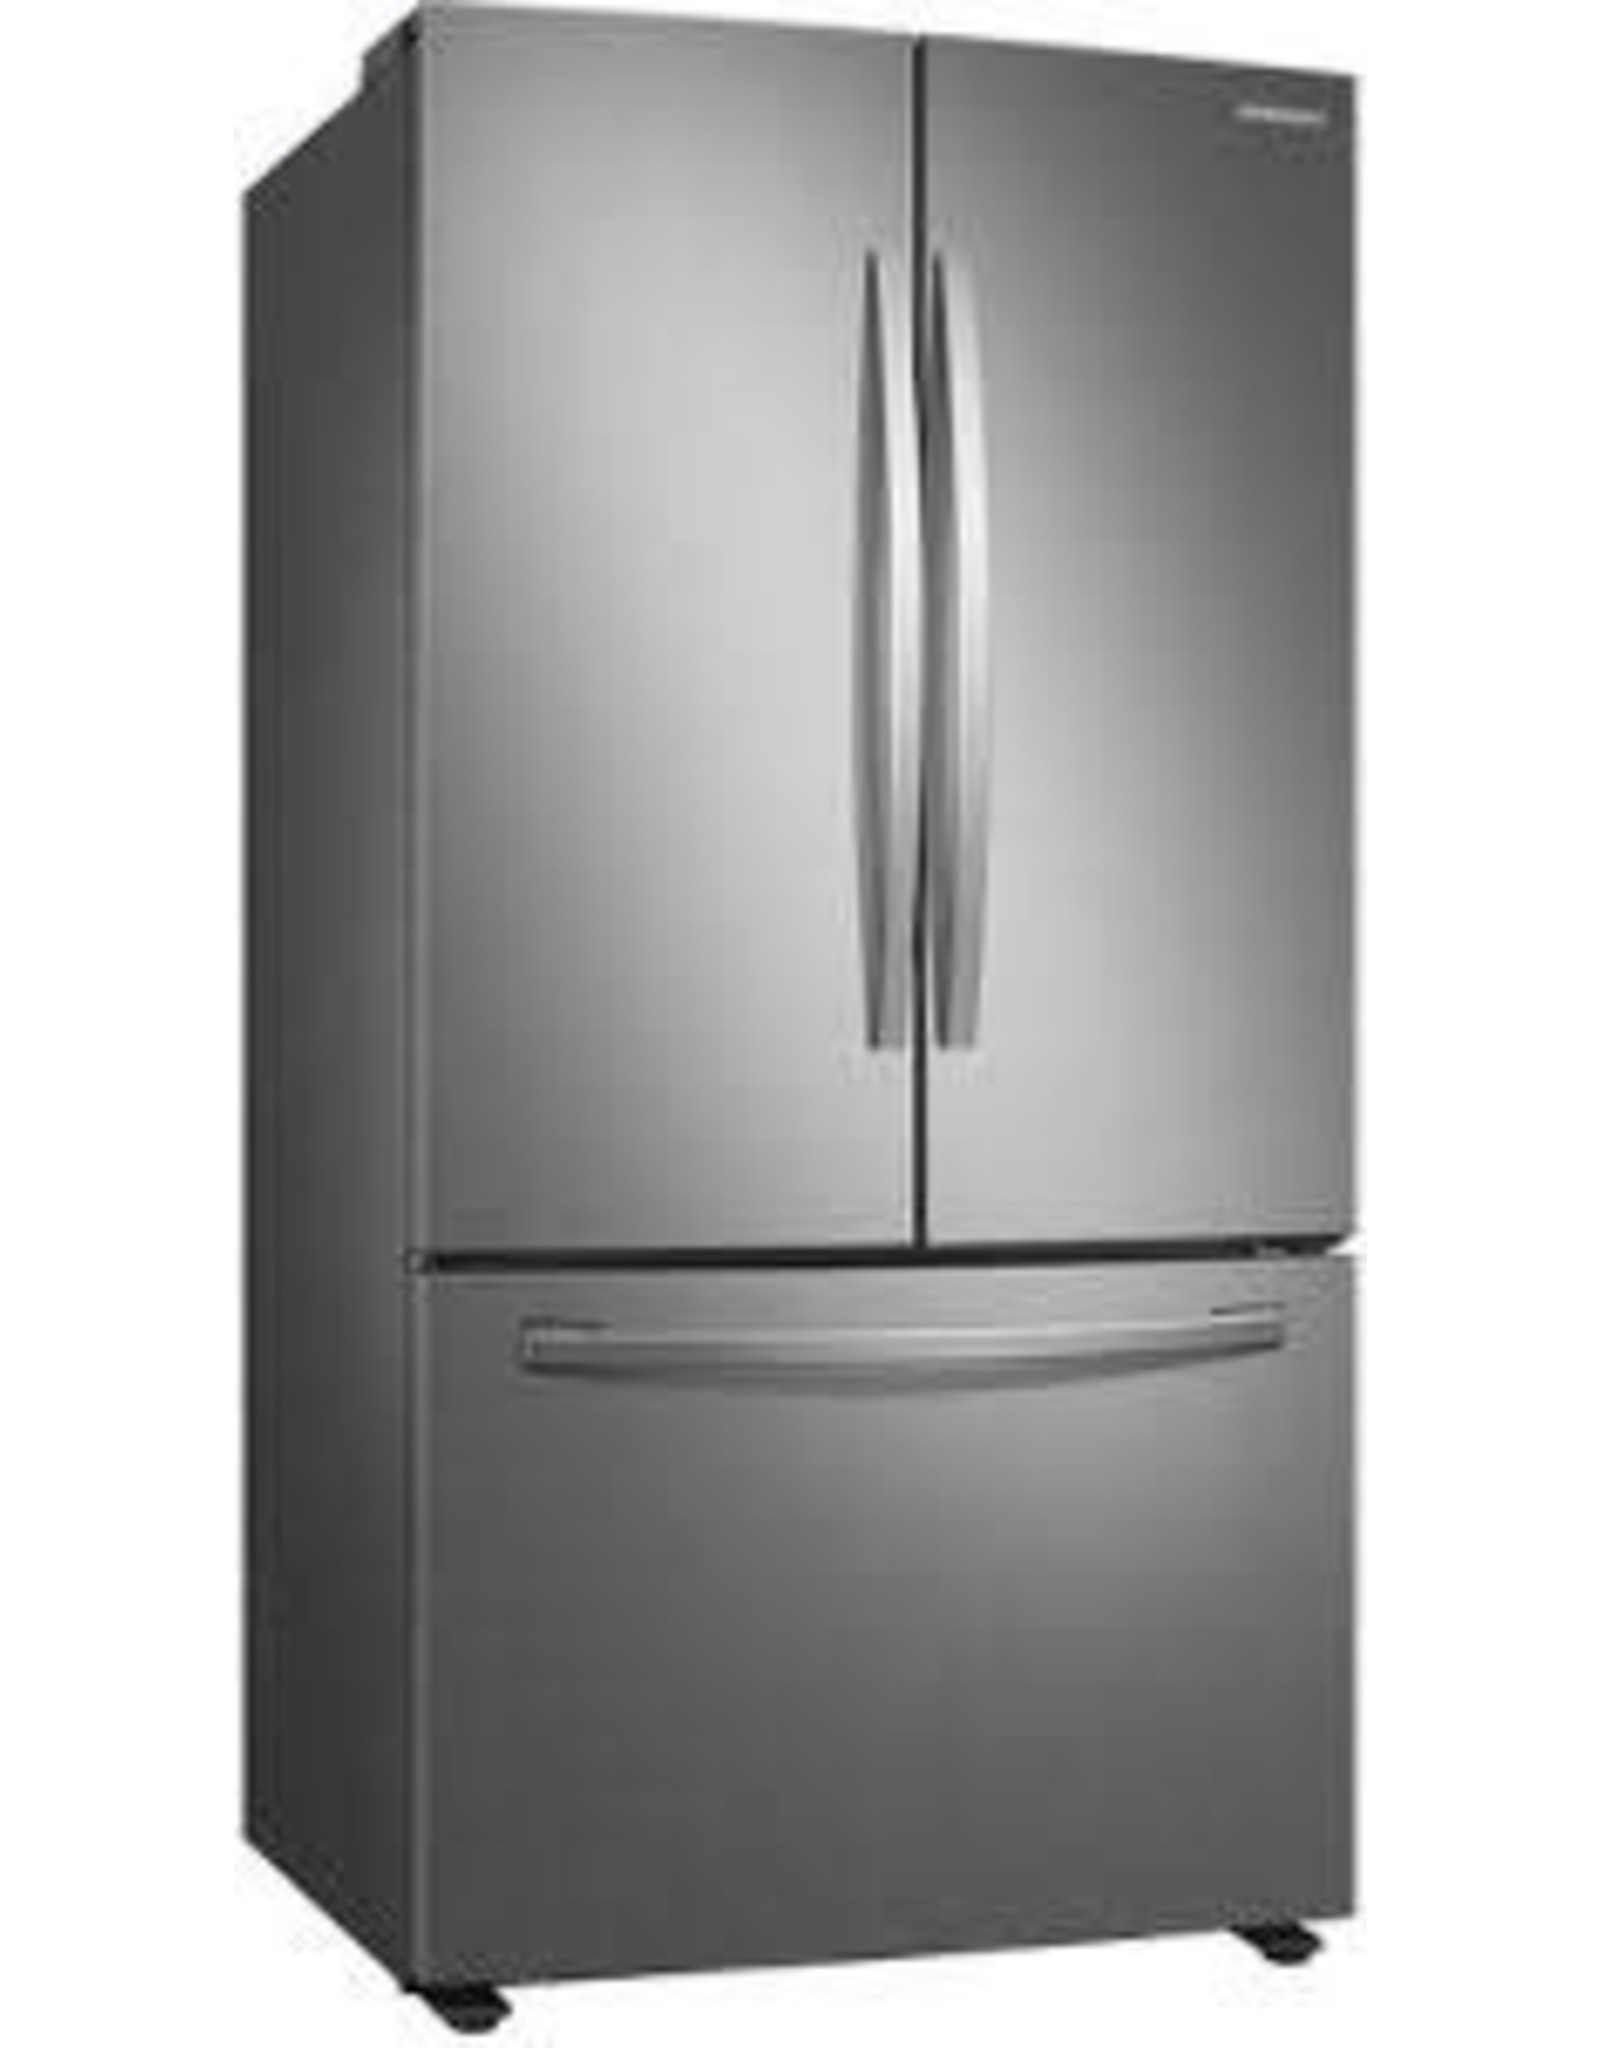 Ck .RF28T5021SR 28.2 cu. ft. French Door Refrigerator in Stainless Steel with Autofill Water Pitcher